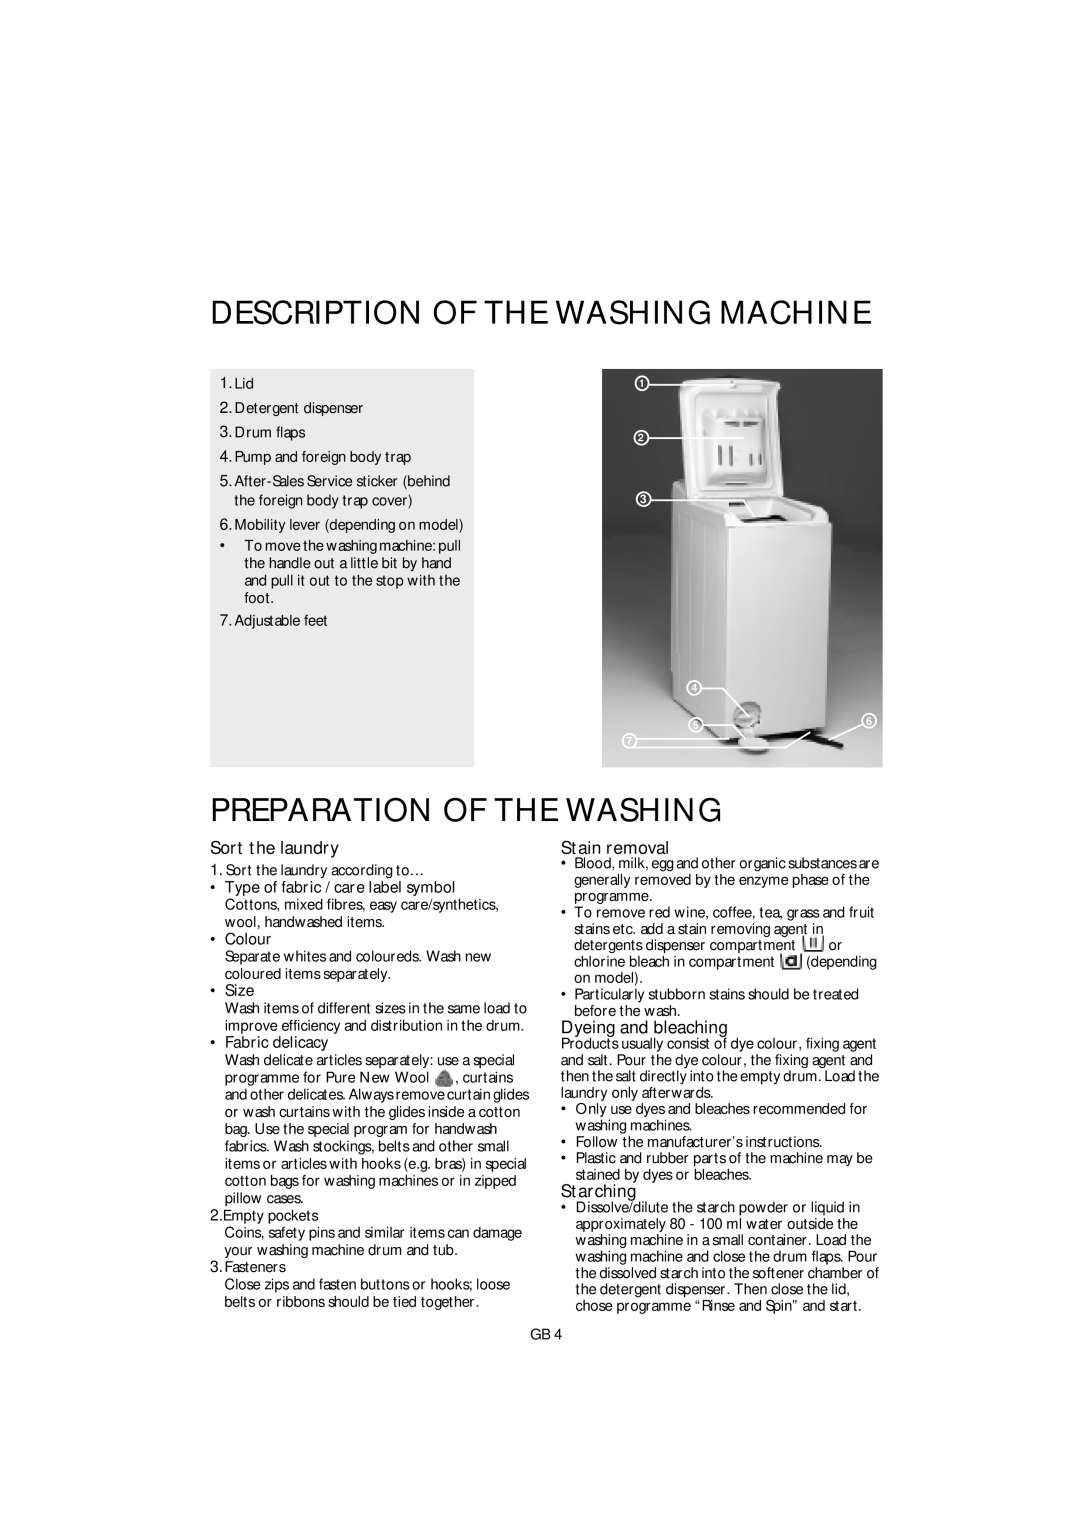 Smeg GB ST L80 Description Of The Washing Machine, Preparation Of The Washing, Sort the laundry, Stain removal, Starching 